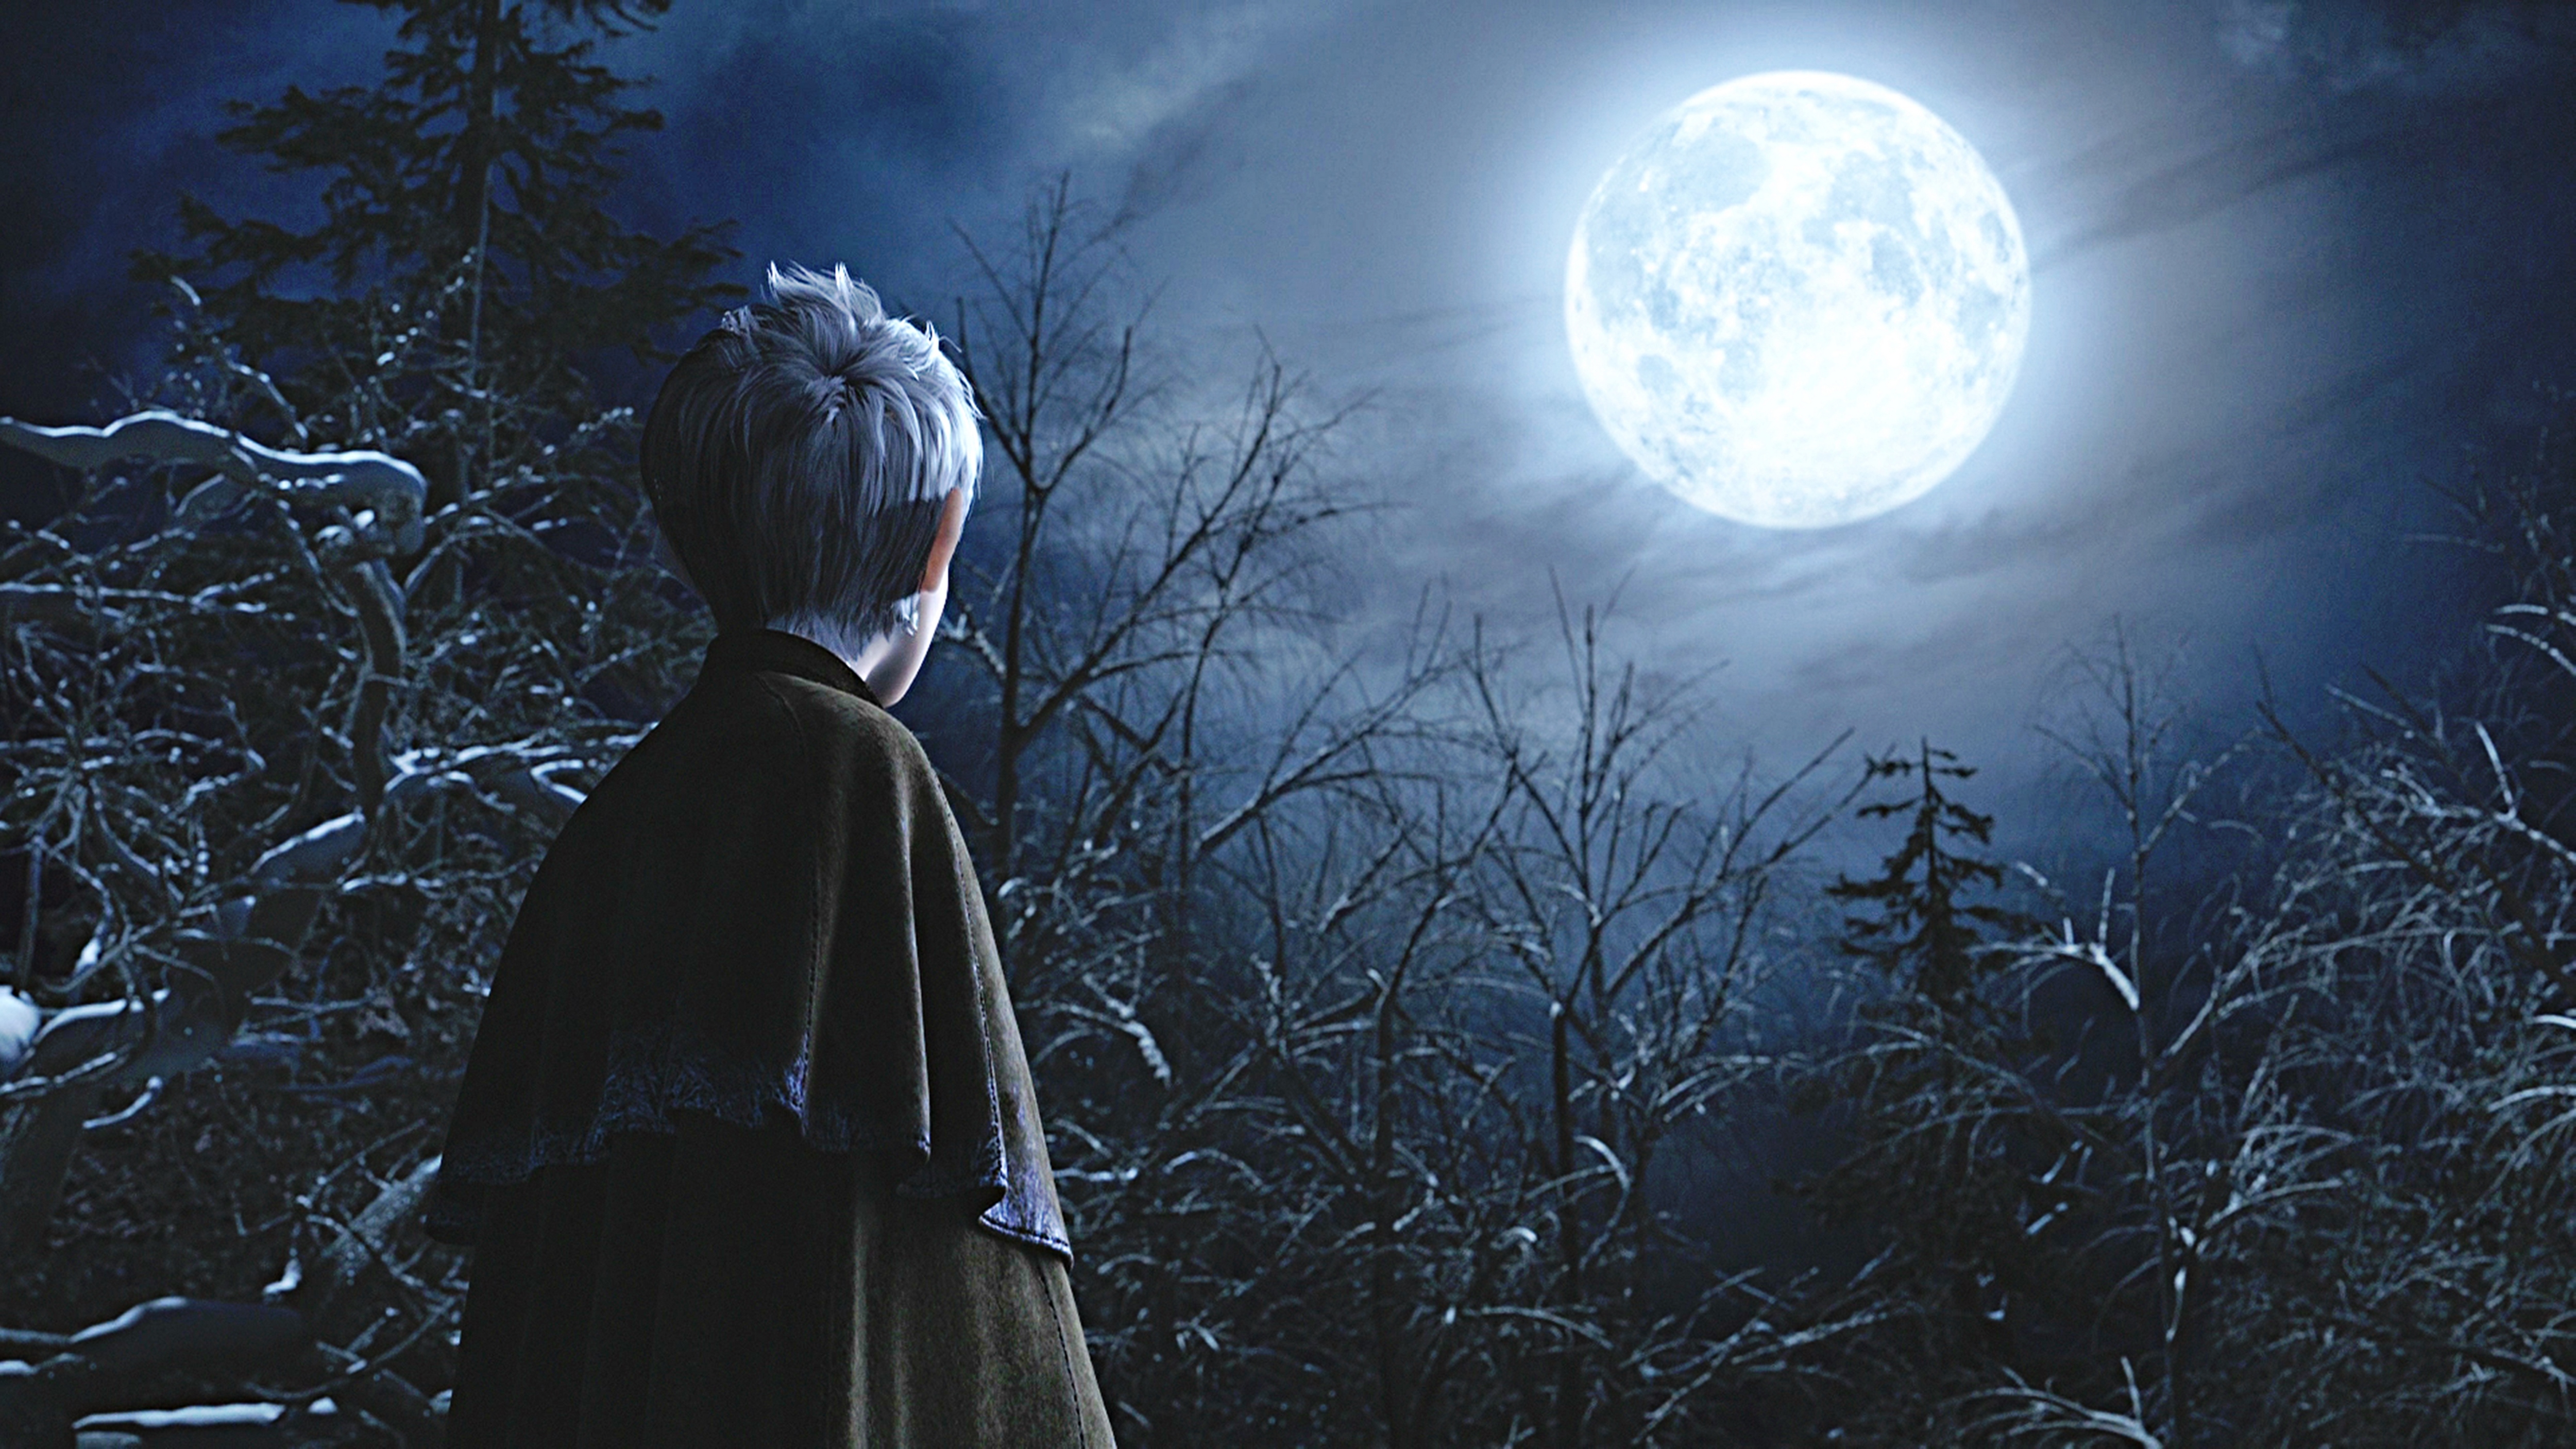 Movie Rise Of The Guardians HD Wallpaper | Background Image